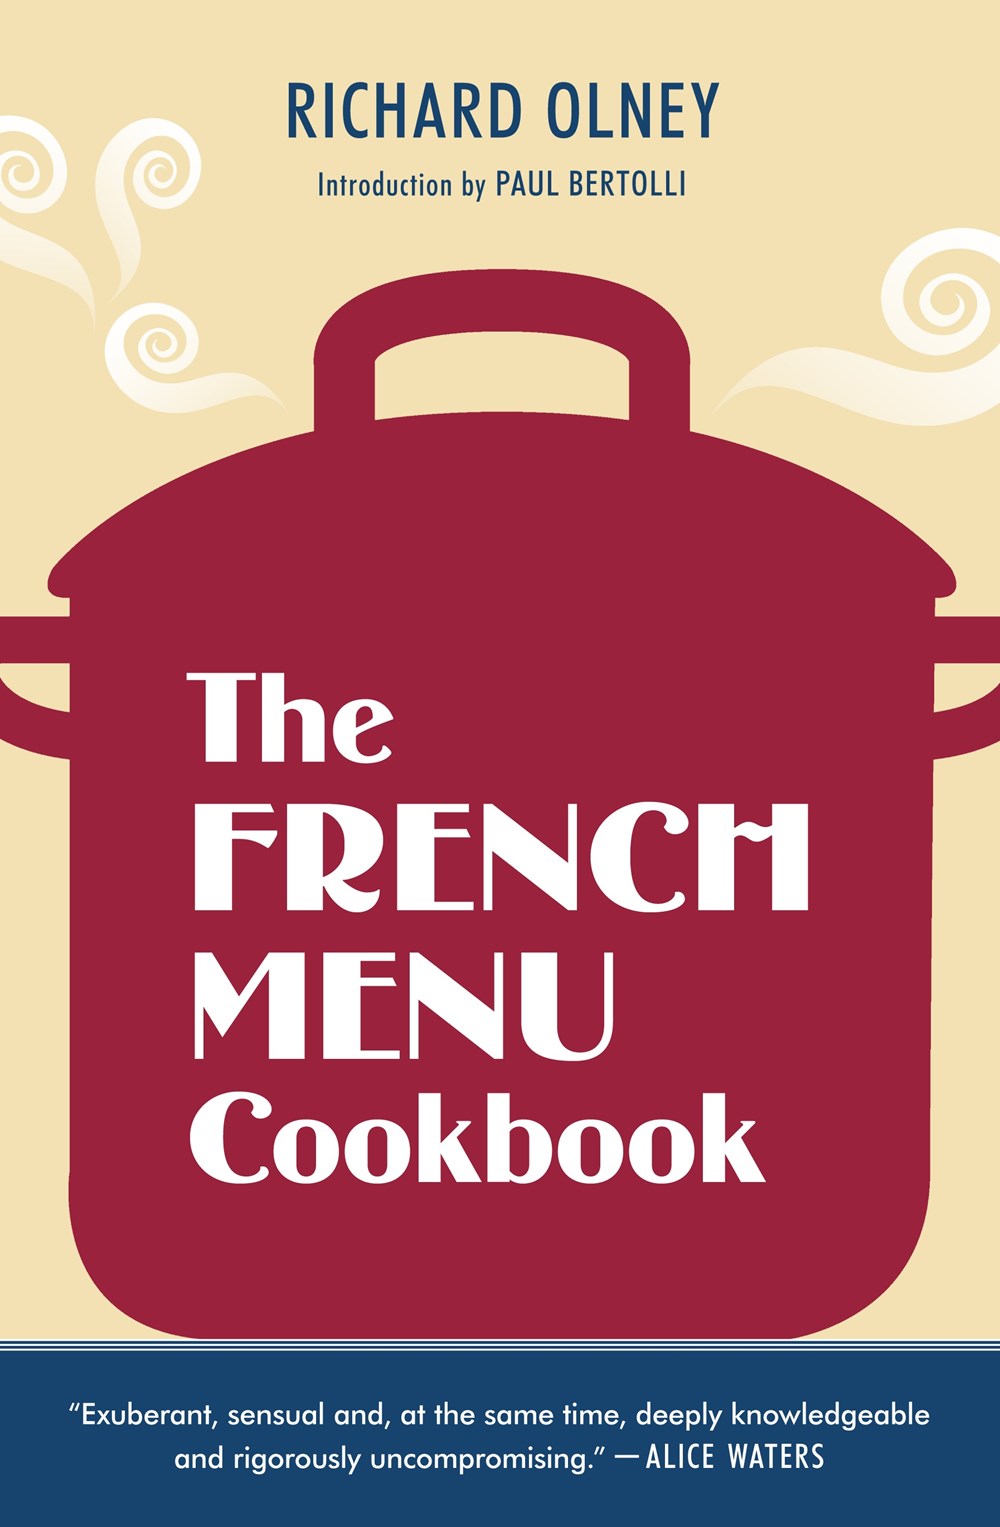 The French Menu Cookbook by Richard Olney